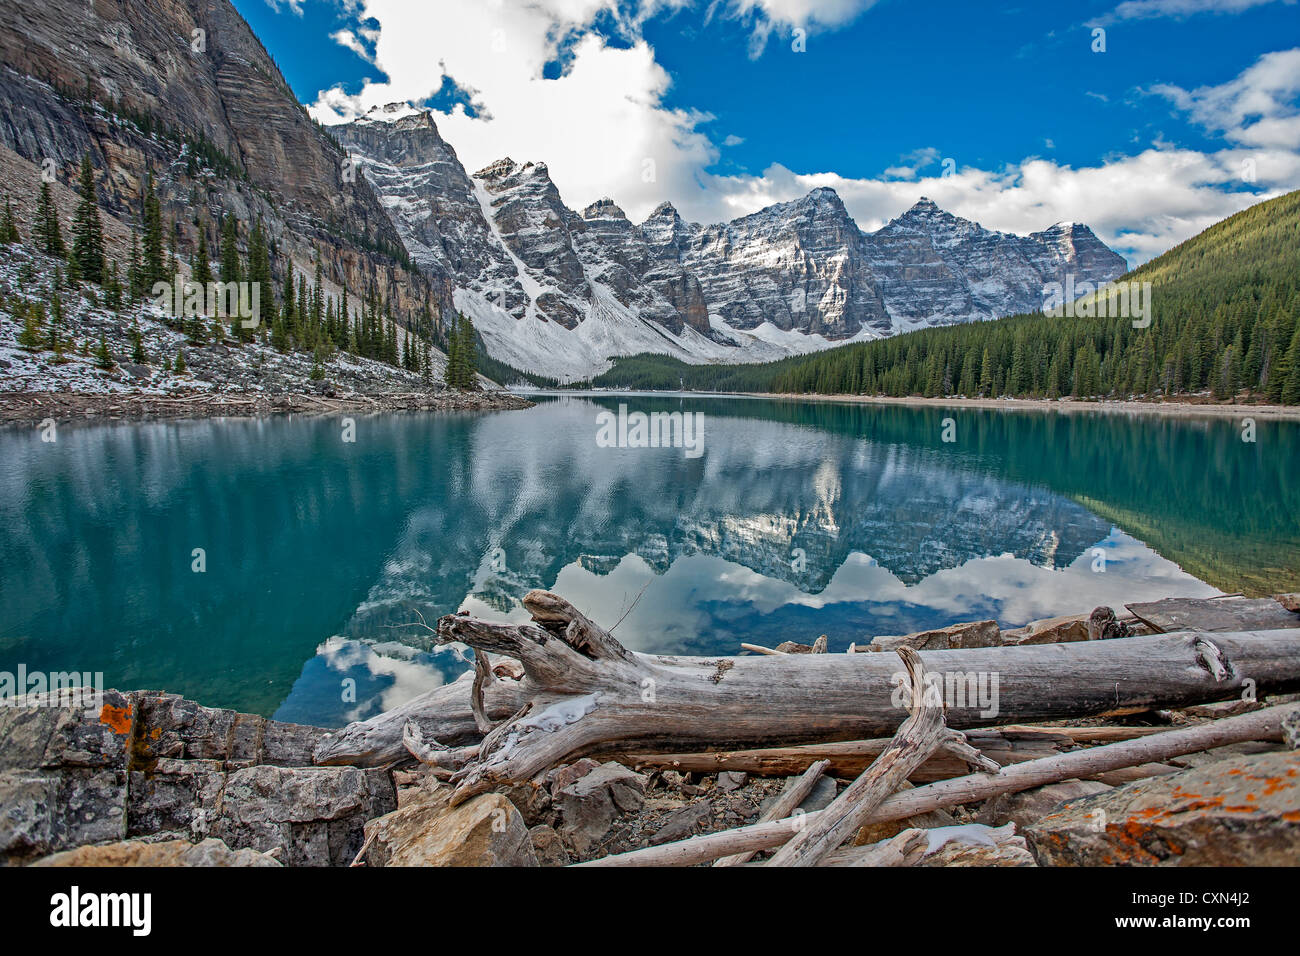 Lake Moraine glacial fed mountain pond with driftwood in forefront and mountain peaks in the background Stock Photo